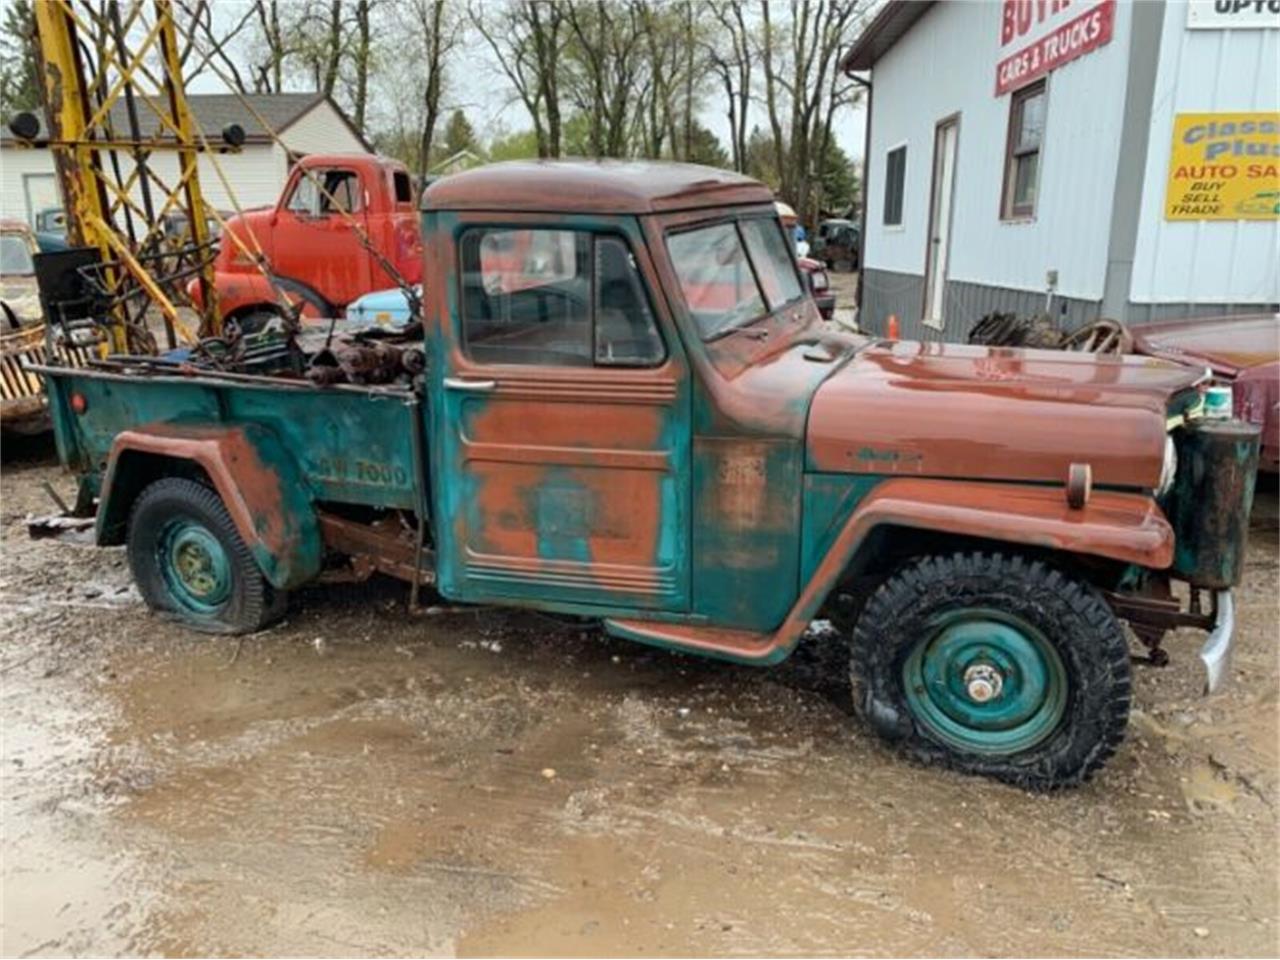 1952 Willys-Overland Jeepster for sale in Cadillac, MI